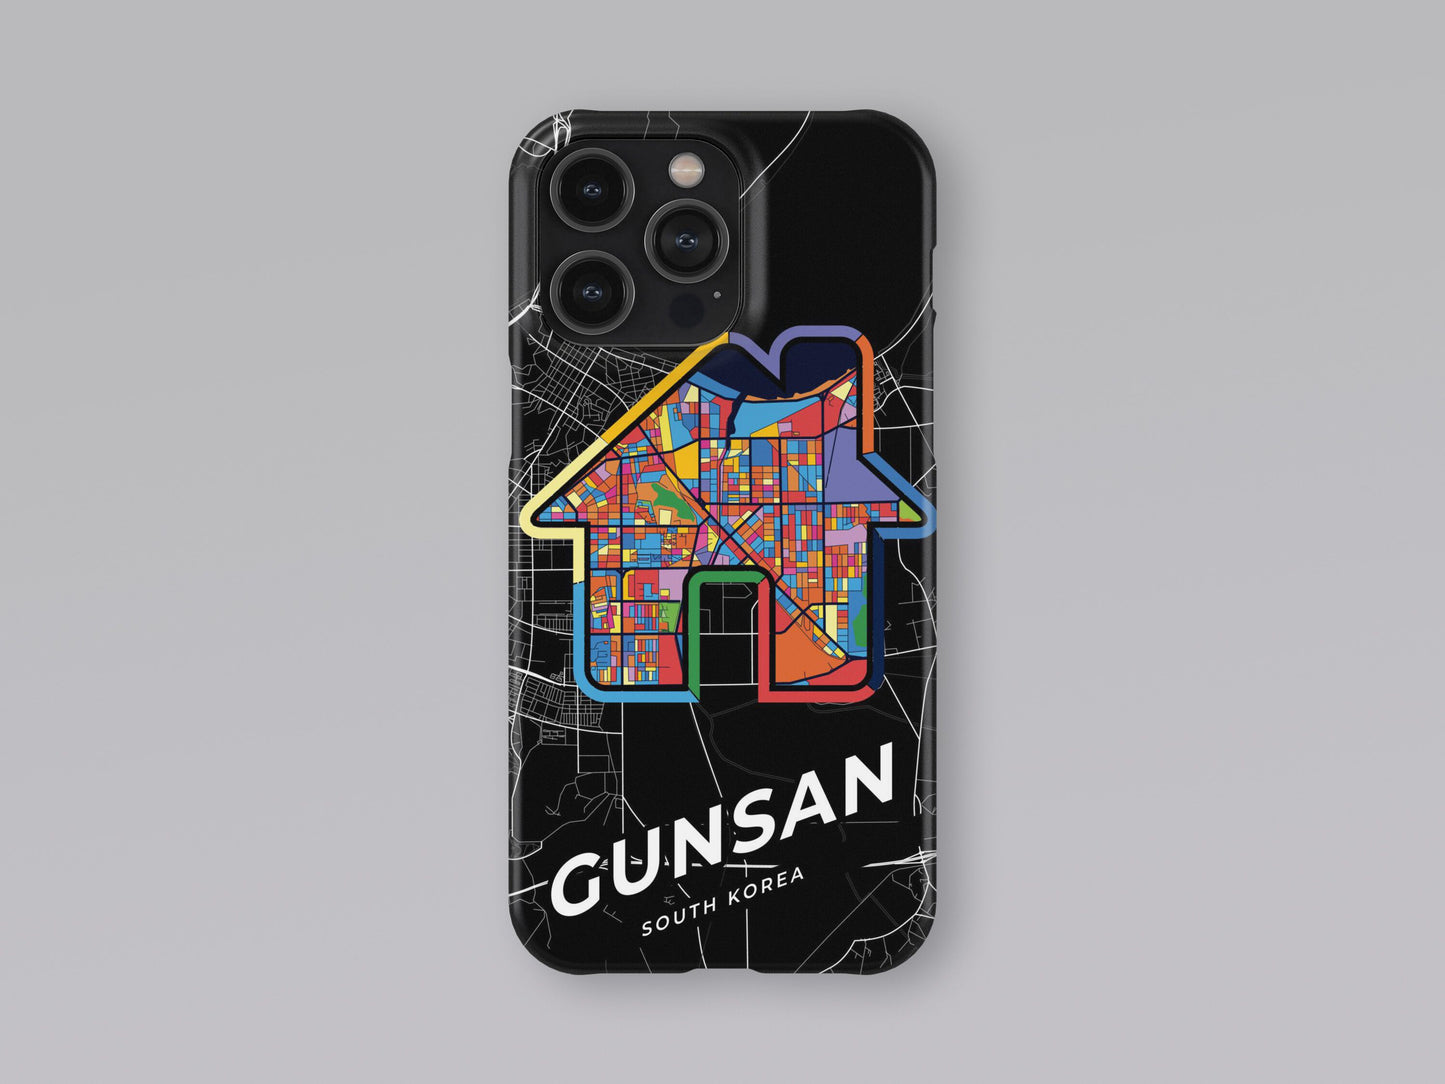 Gunsan South Korea slim phone case with colorful icon. Birthday, wedding or housewarming gift. Couple match cases. 3